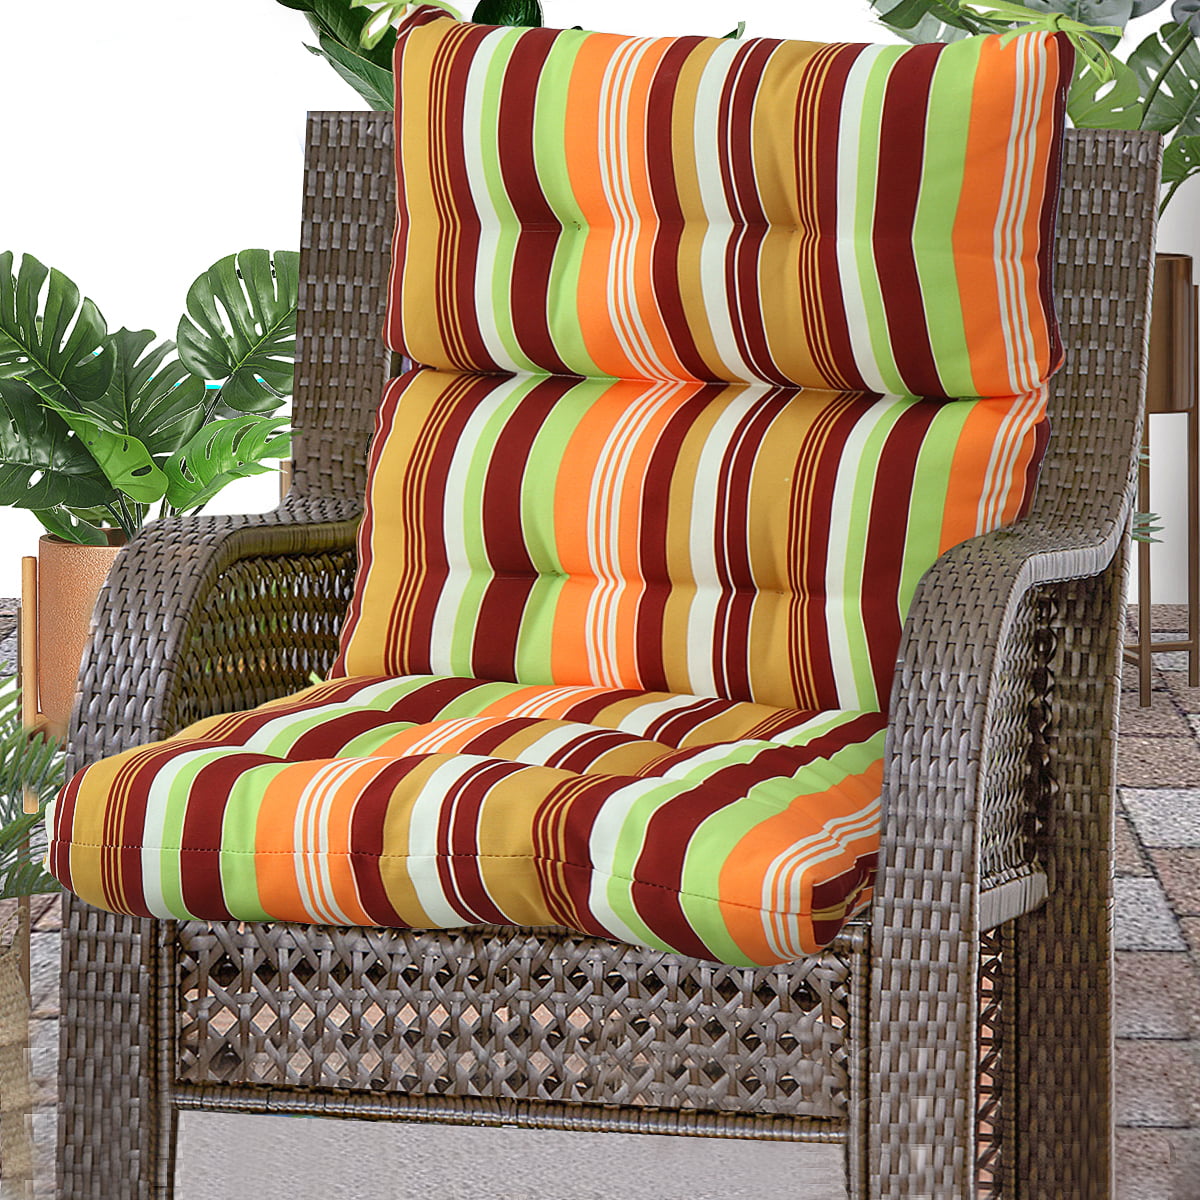 Romhouse 44x21 inch Solid Polyester Chair Cushion Outdoor High Back